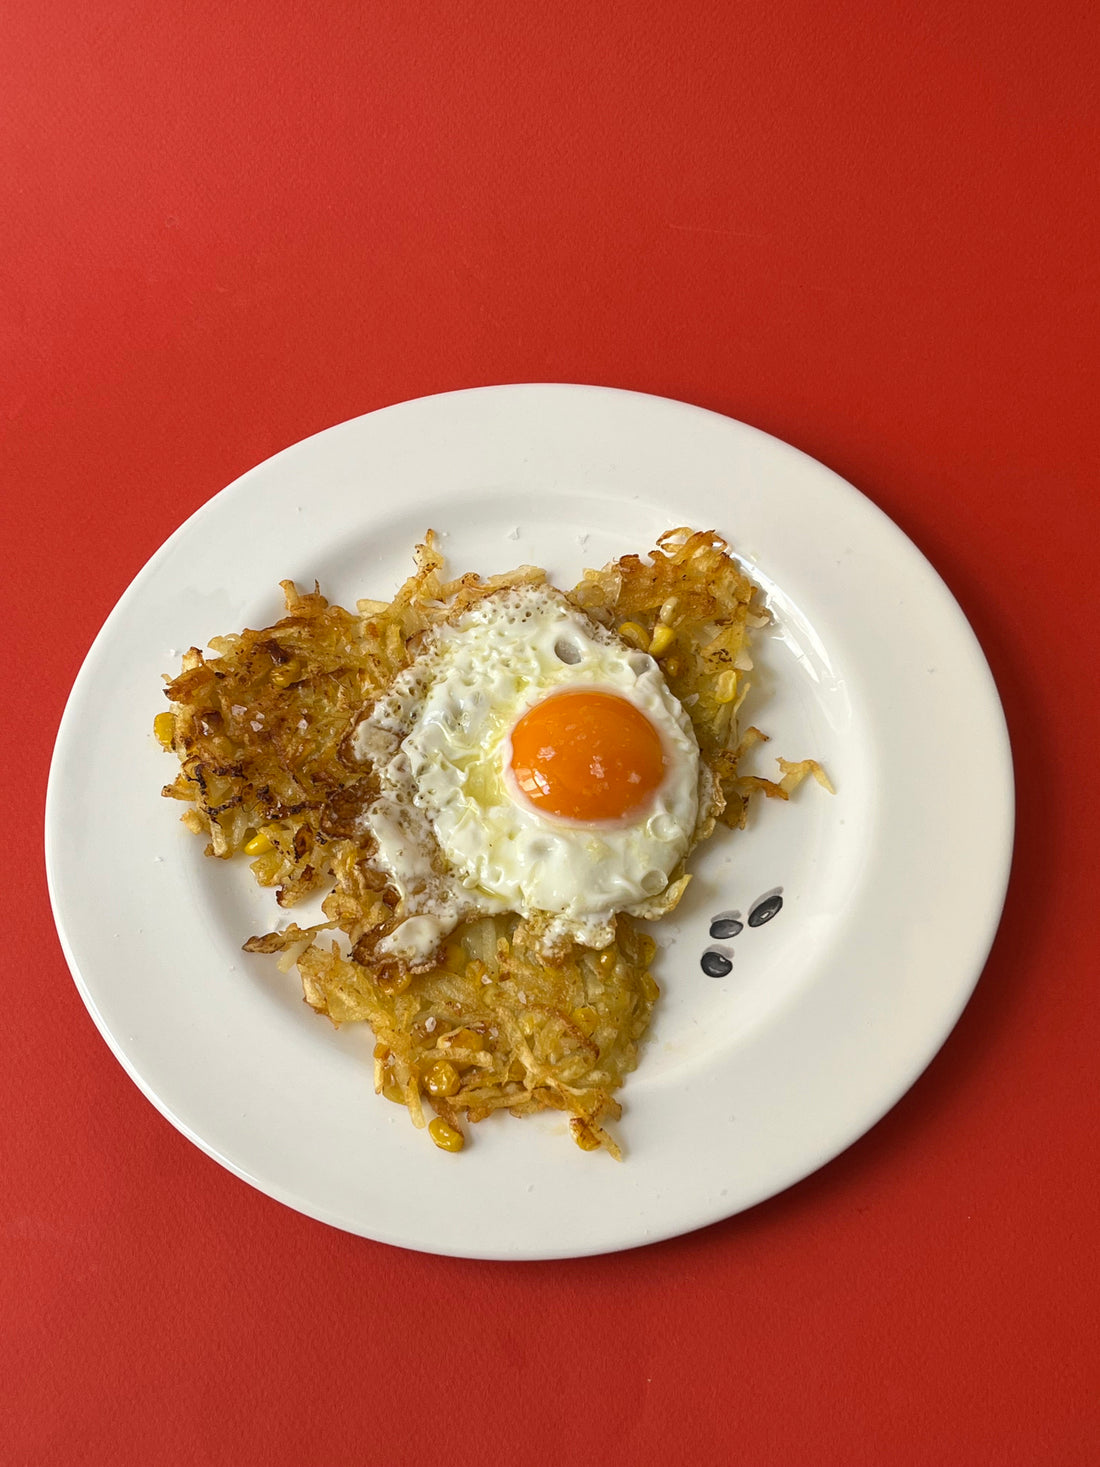 Potato and Corn Fritter with an Egg